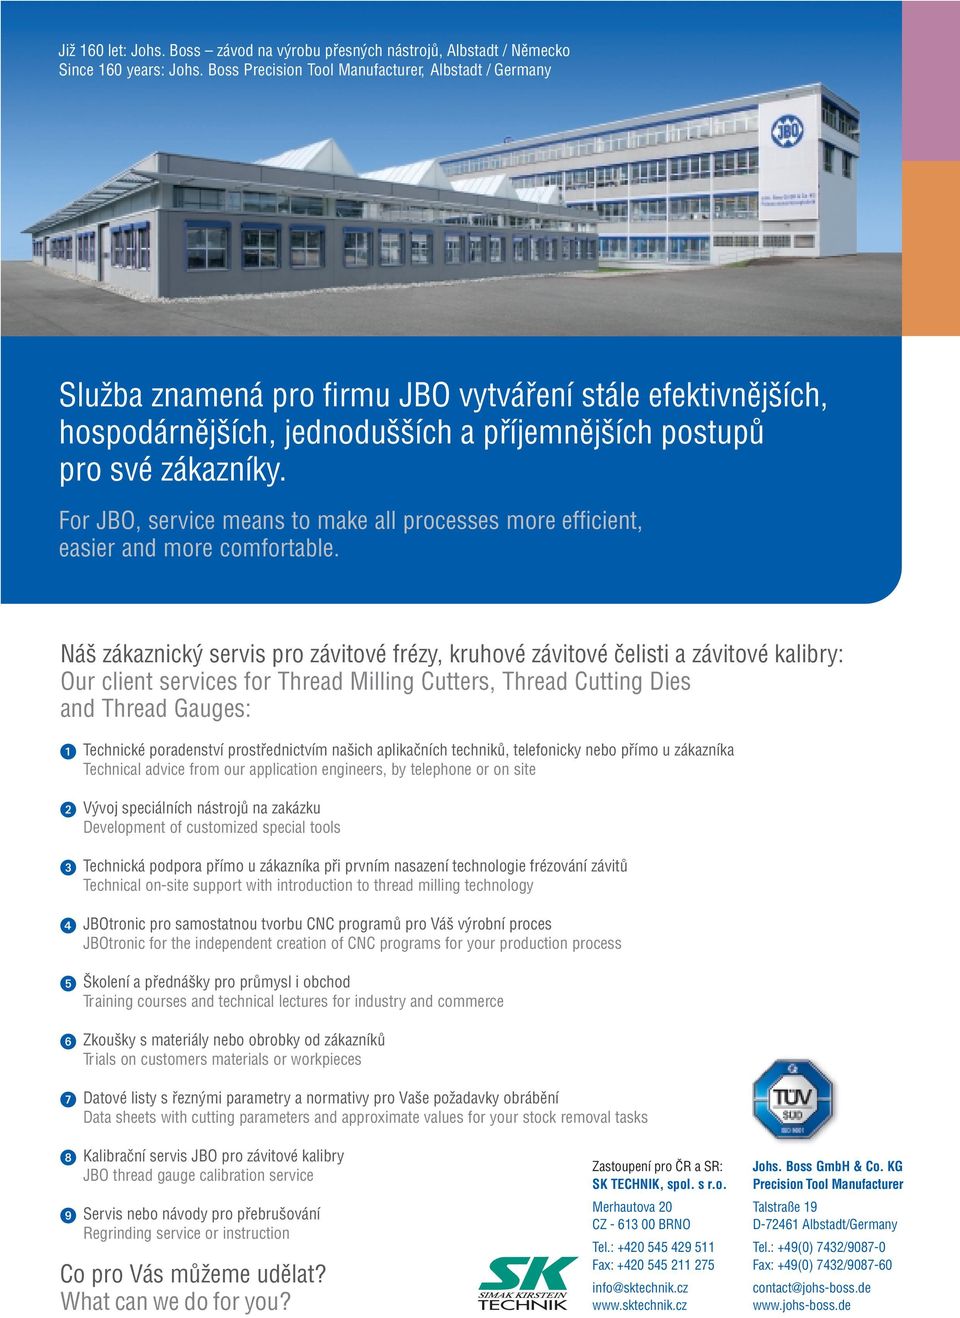 For JBO, service means to make all processes more efficient, easier and more comfortable.